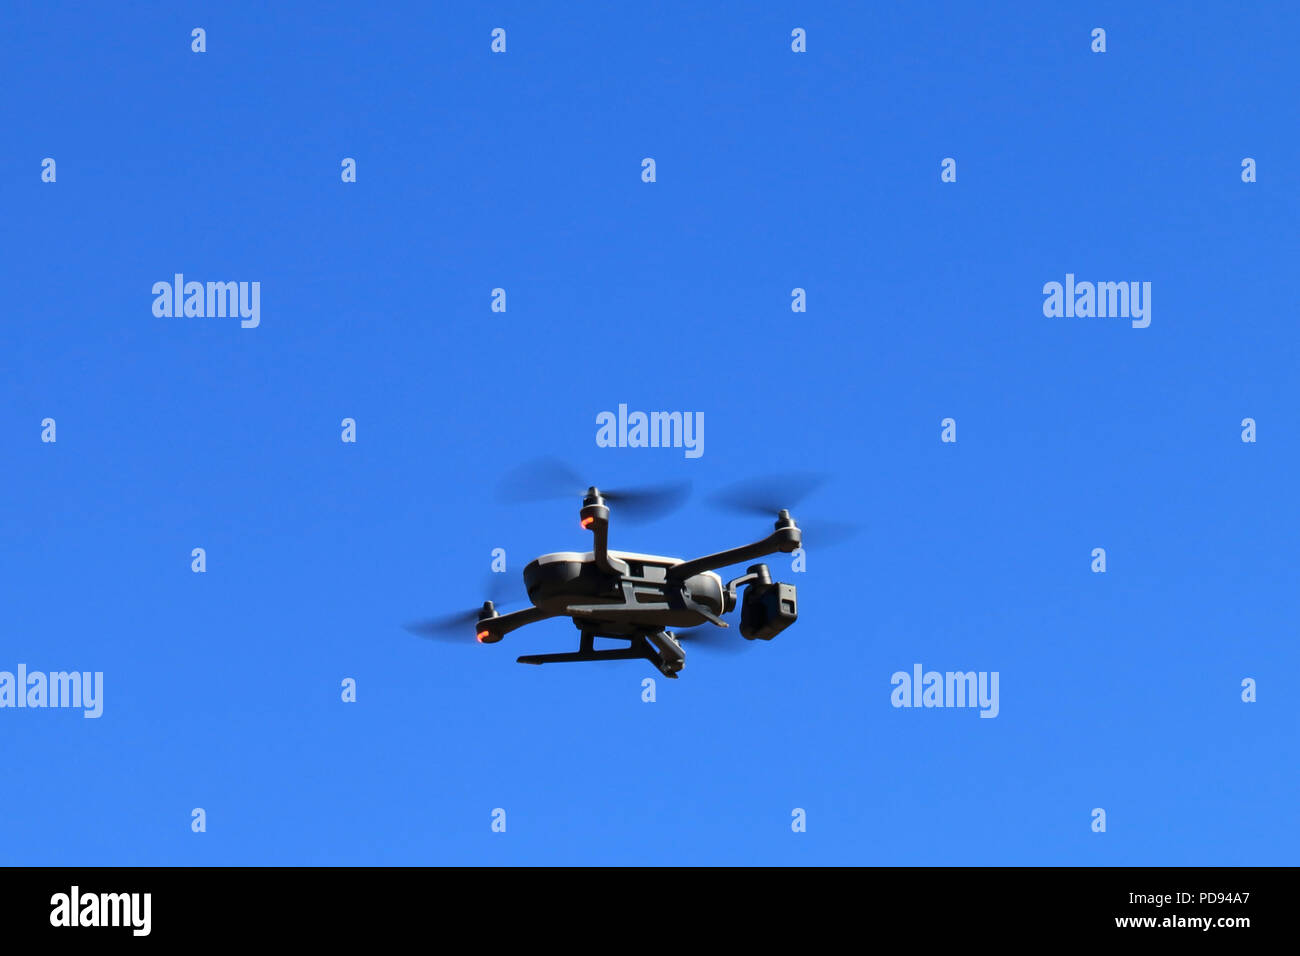 Drone with four propellers in flight Stock Photo